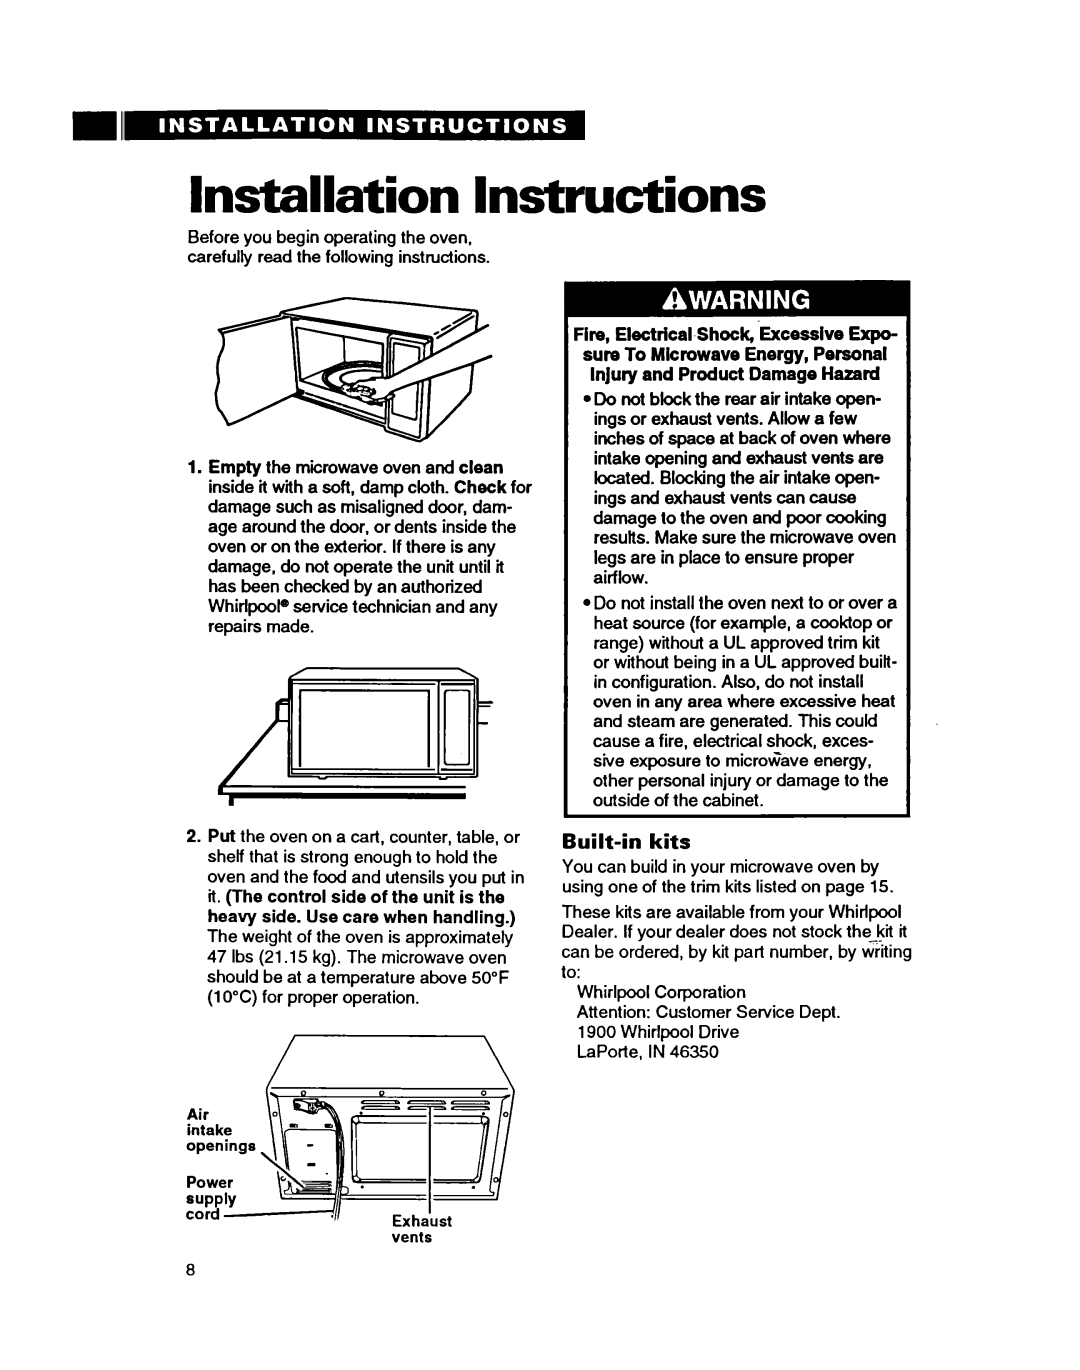 Whirlpool MT9160XBB warranty Installation Instructions, Built-inkits, Fire, Electrical-Shock,~Excesaive Ex~o 